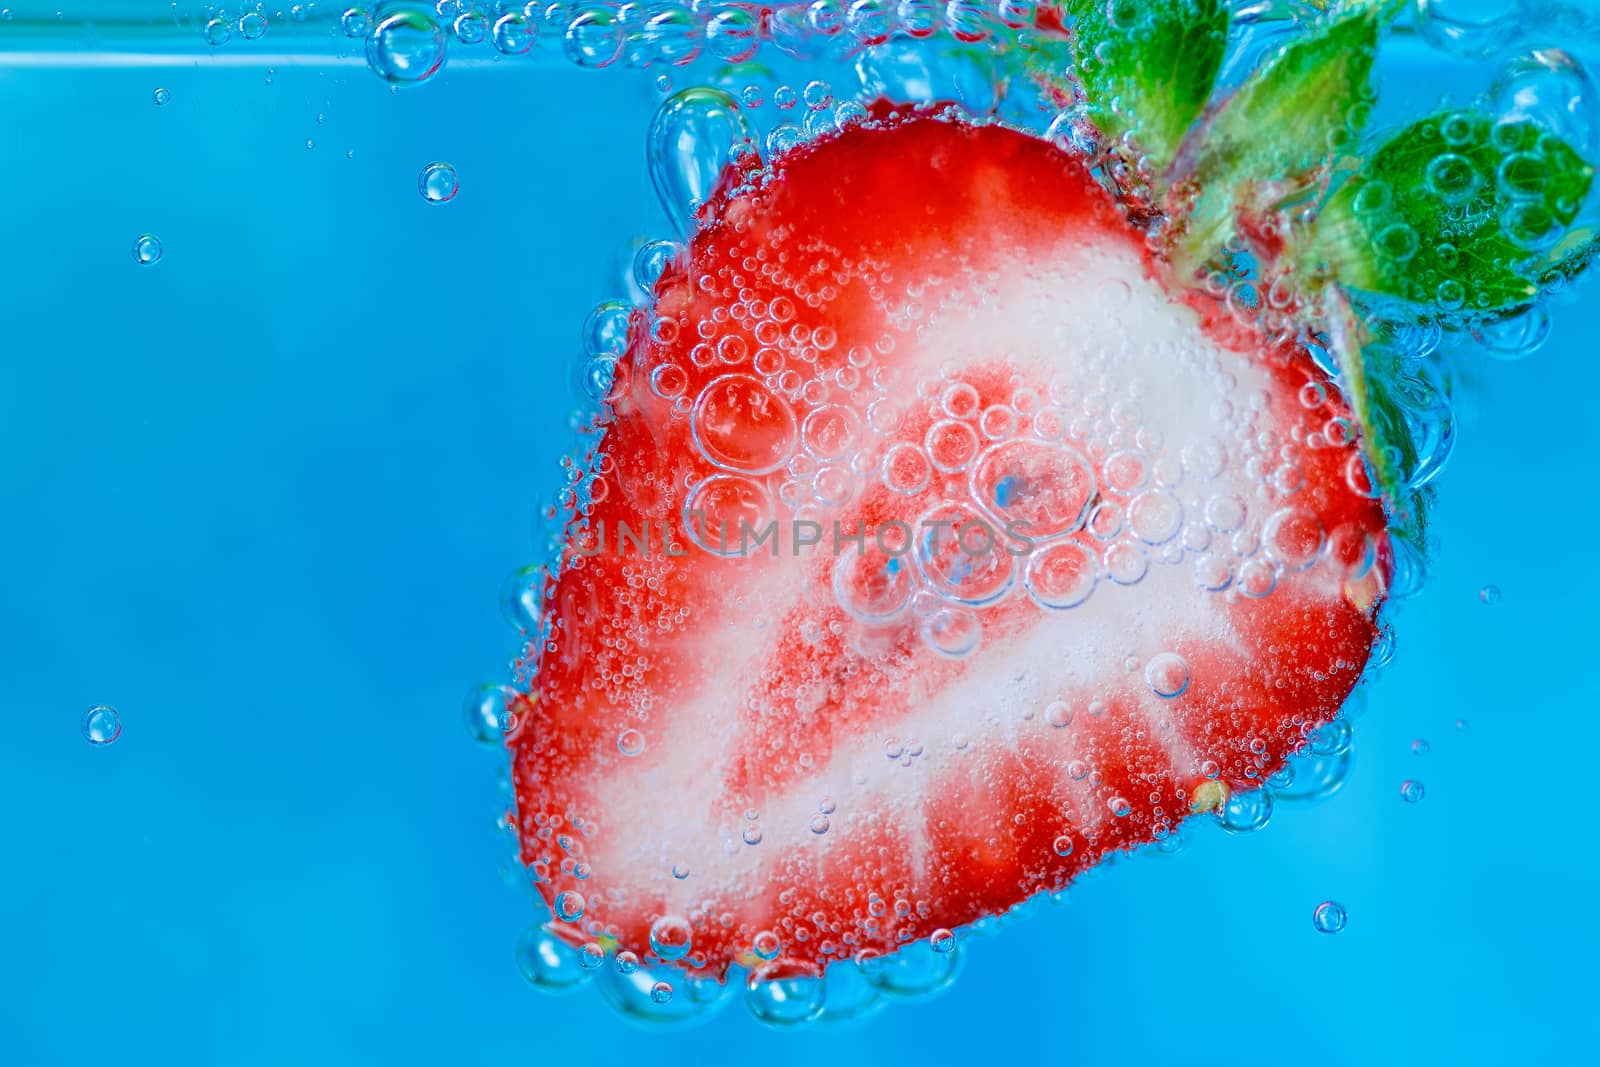 slice of strawberry in a glass of water on a blue background with bubbles